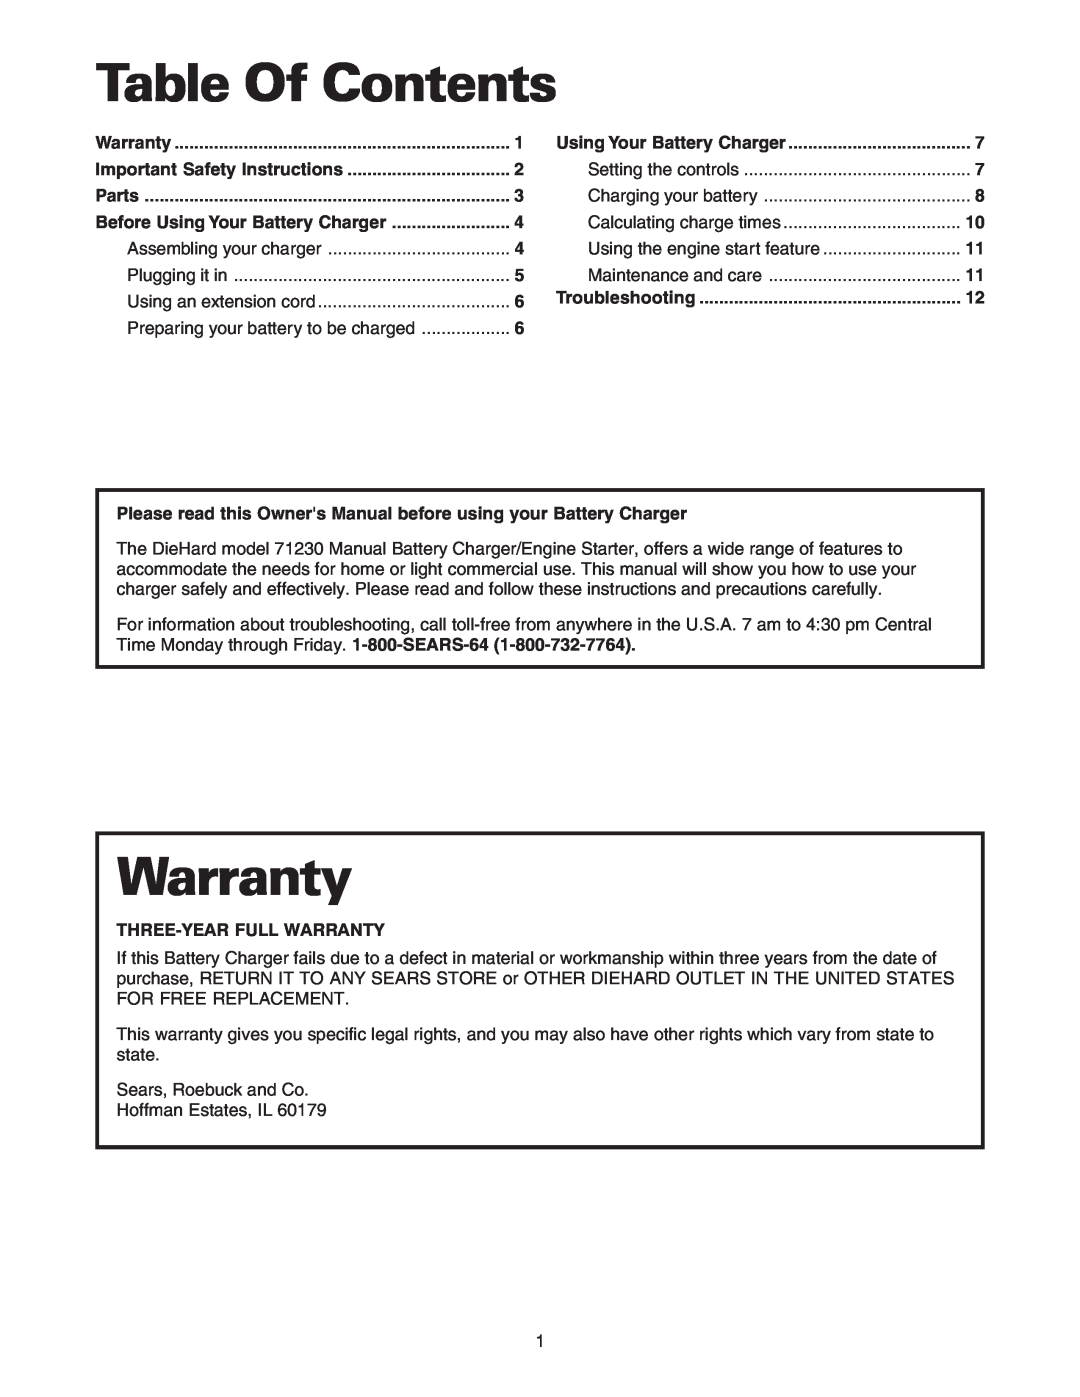 Sears 200.71231 owner manual Table Of Contents, Three-Year Full Warranty, Assembling your charger, Plugging it in 